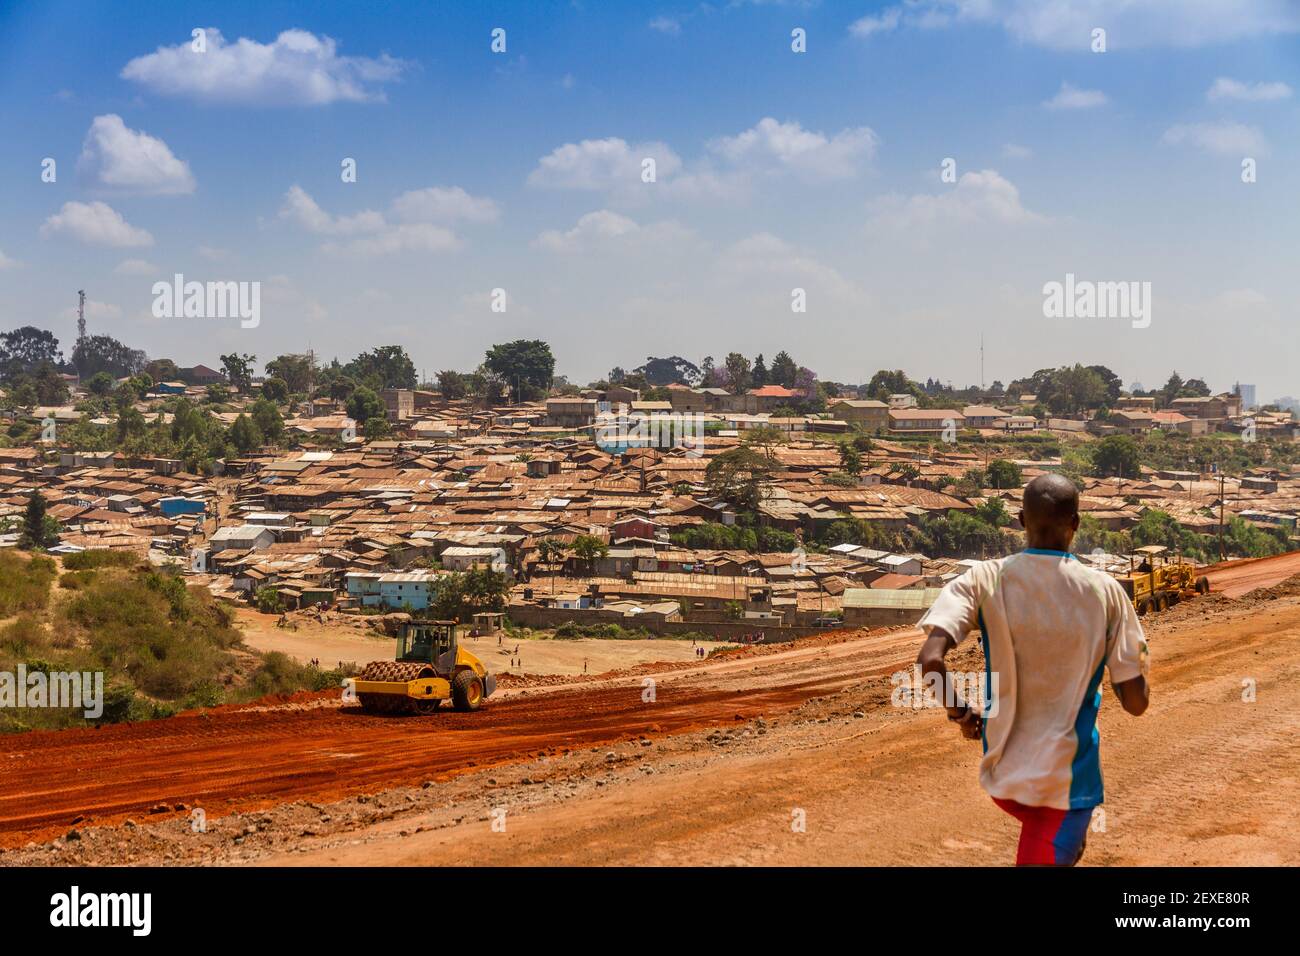 An African man runs for exercise on a dirt road next to part of the Kibera slum in Nairobi, Kenya. Stock Photo